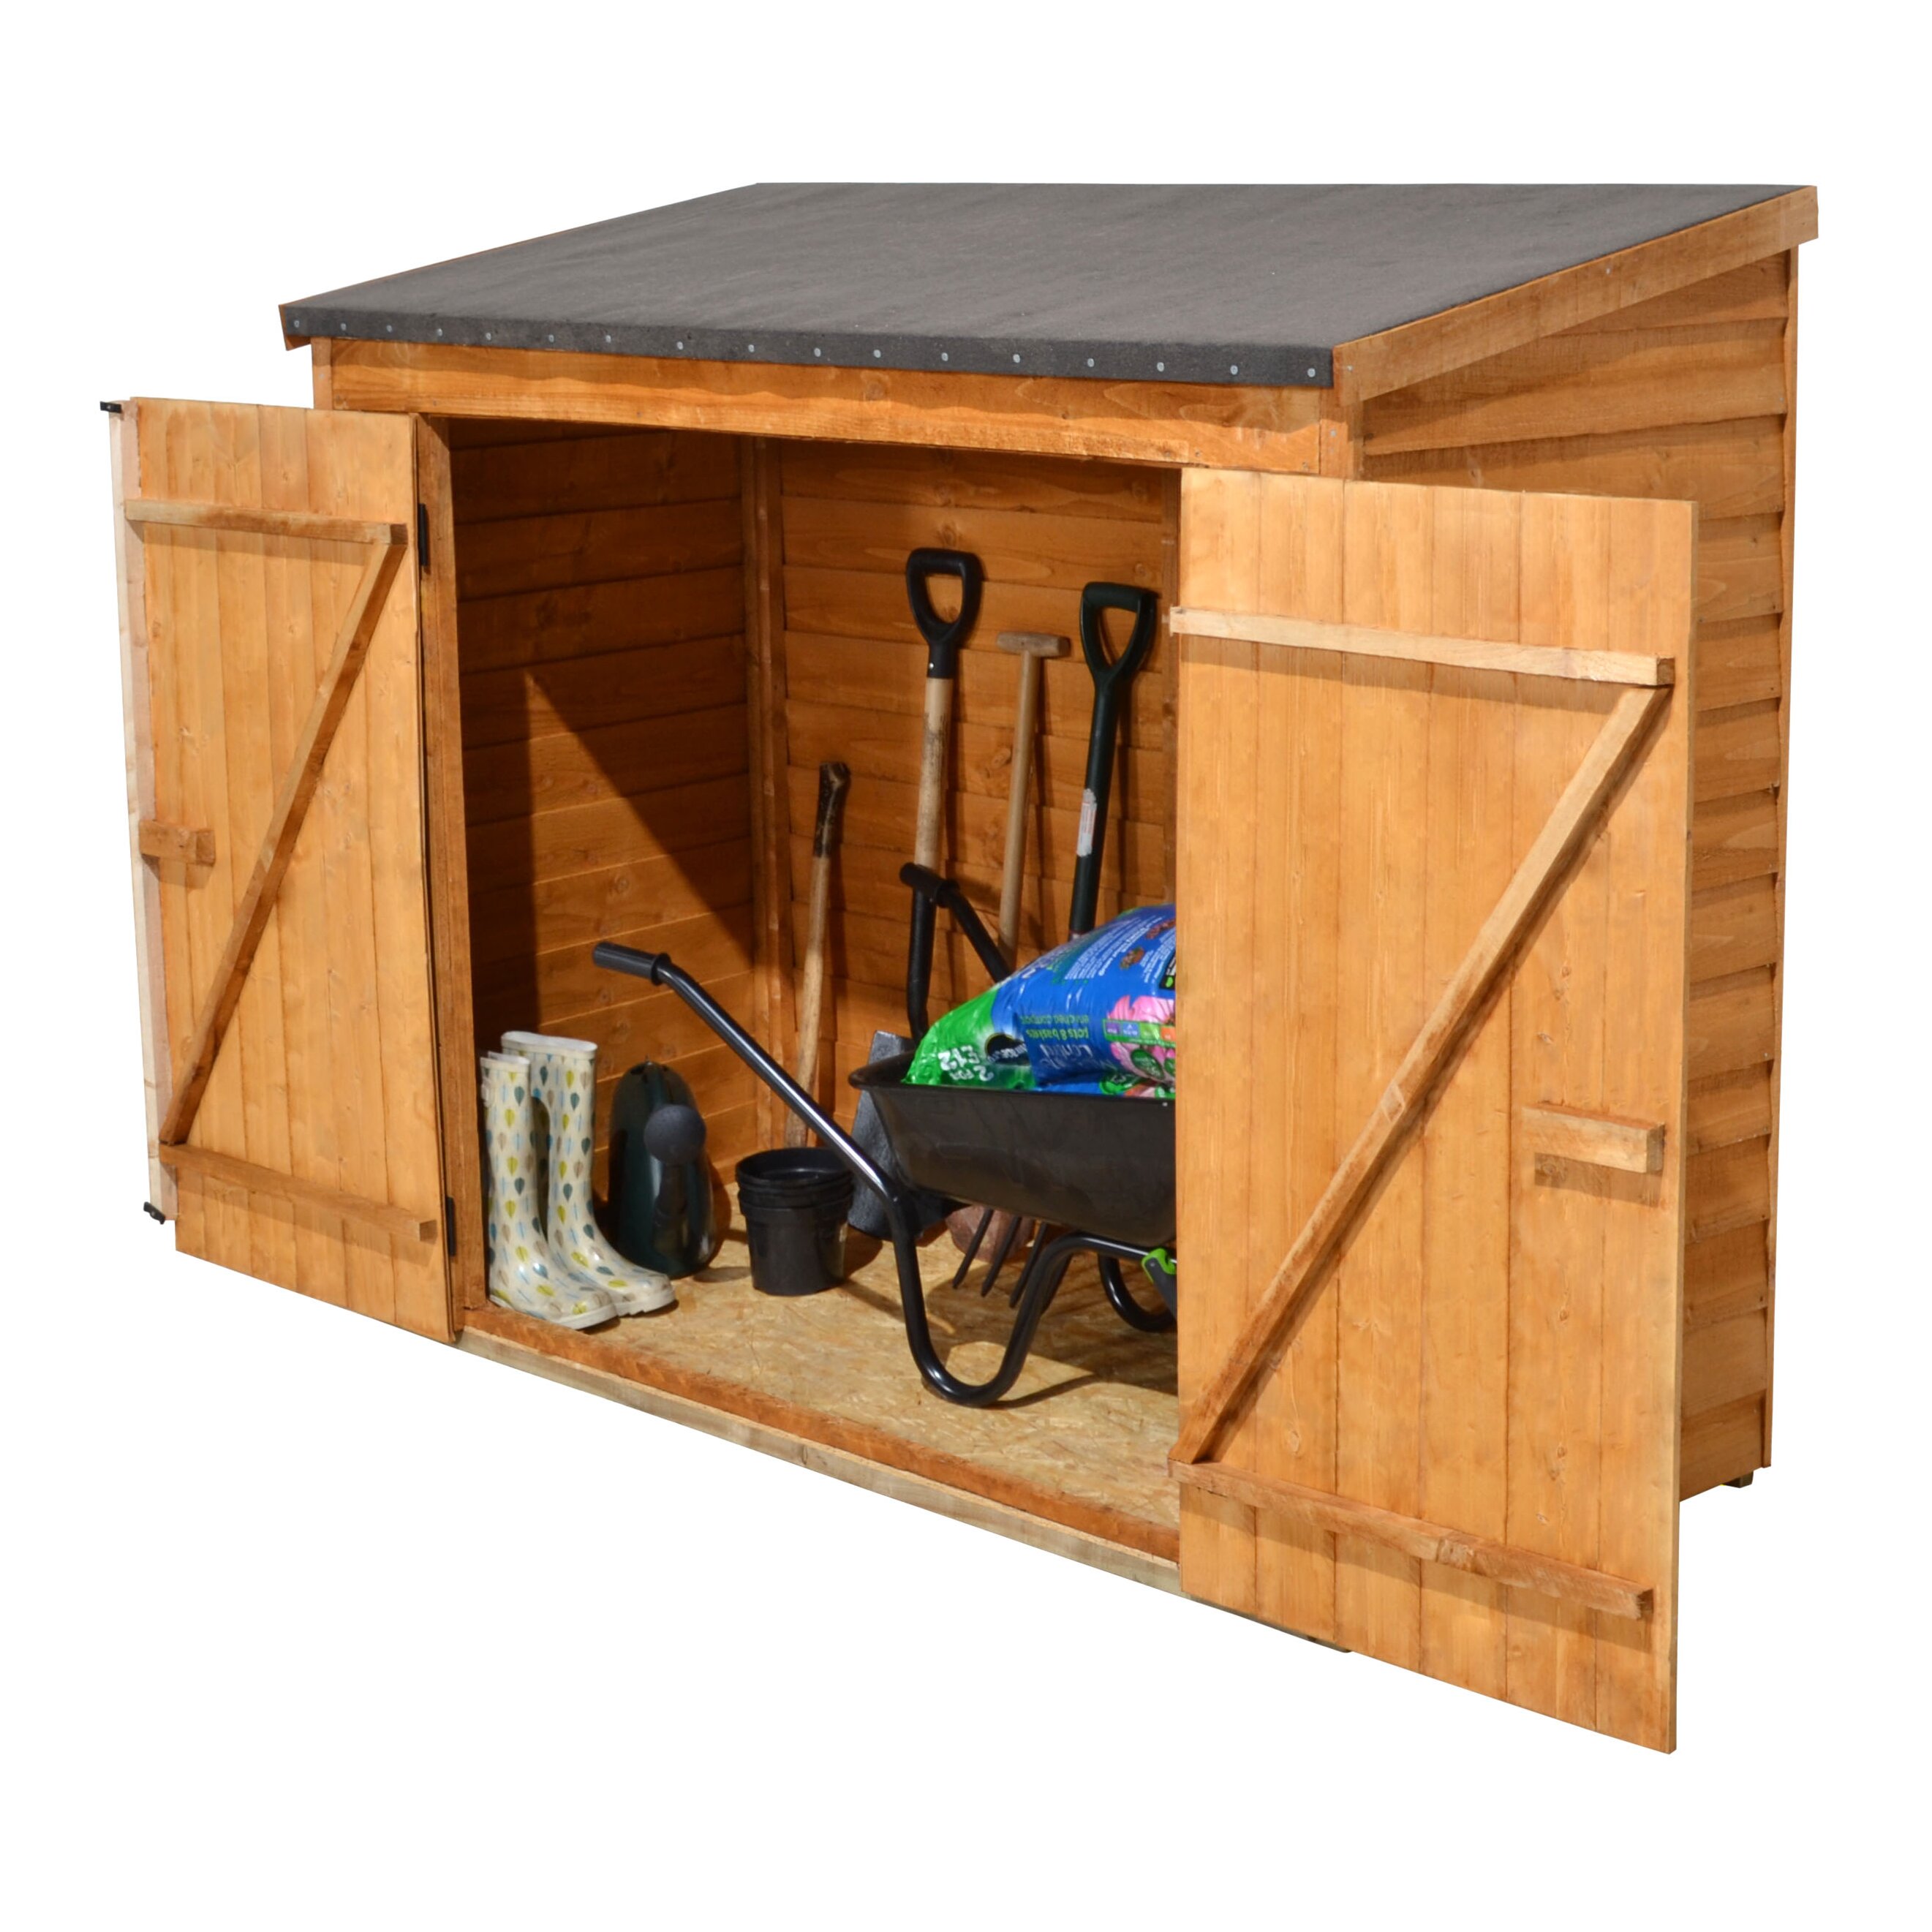 Forest Garden 6ft X 3ft Wooden Tool Shed And Reviews Uk